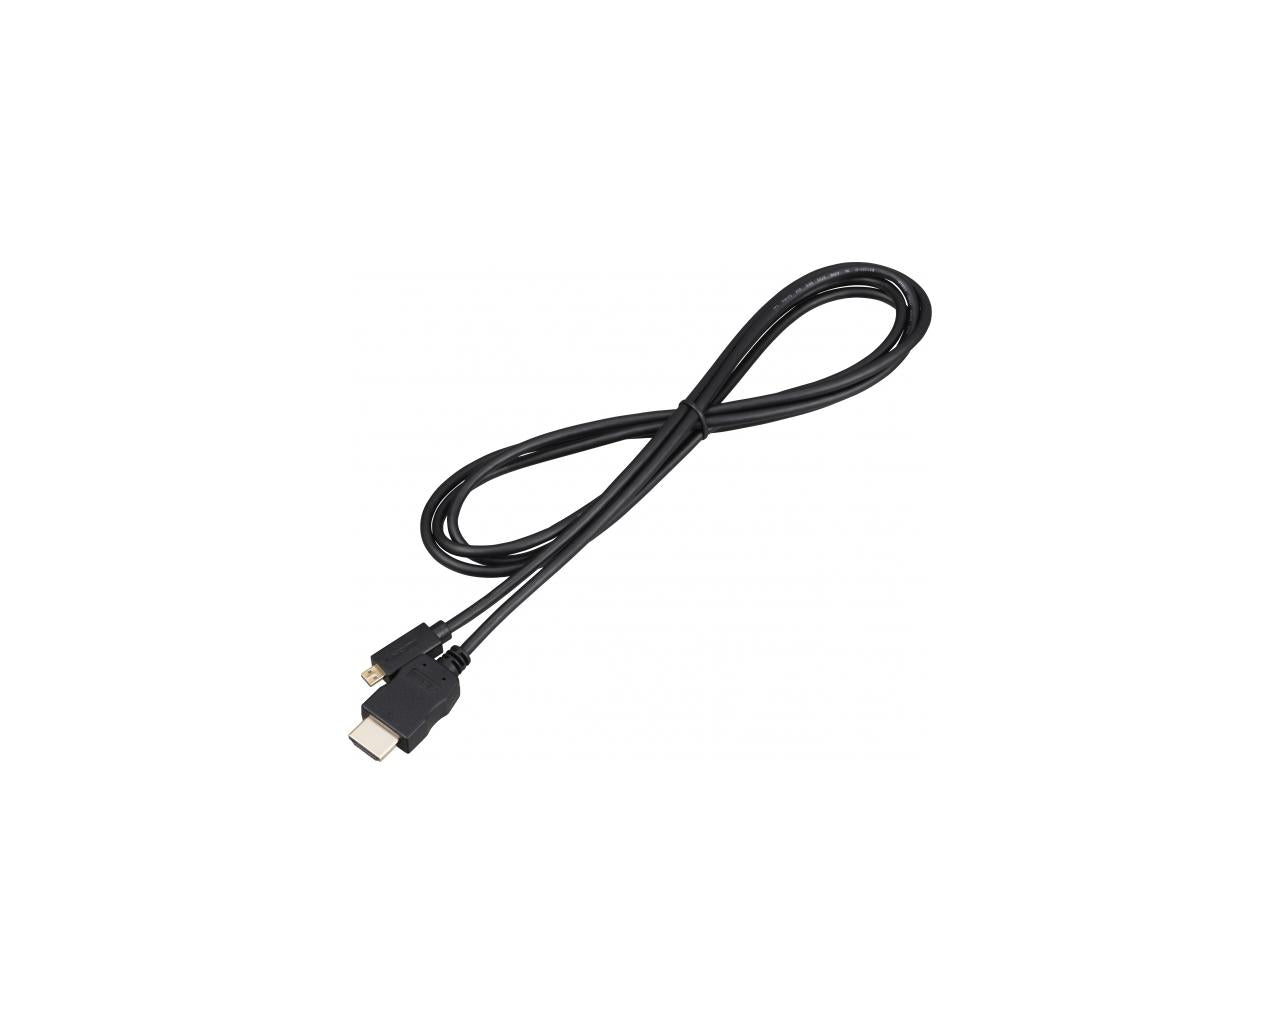 JVC KS-U70 HDMI (Type-A) to micro HDMI (Type-D) Cable